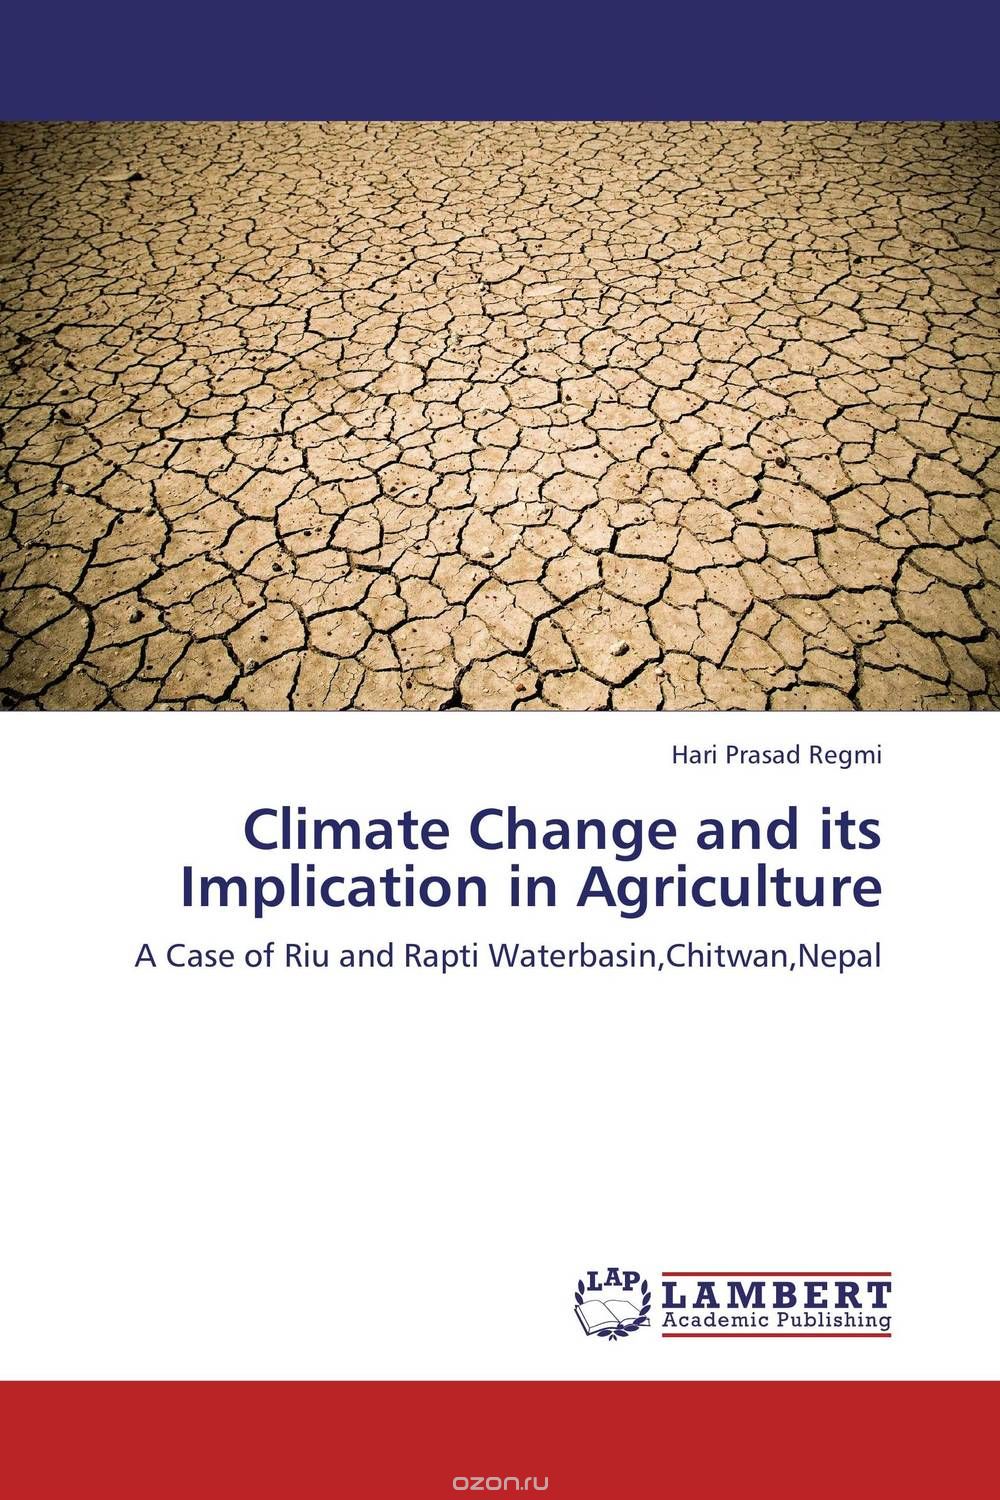 Скачать книгу "Climate Change and its Implication in Agriculture"